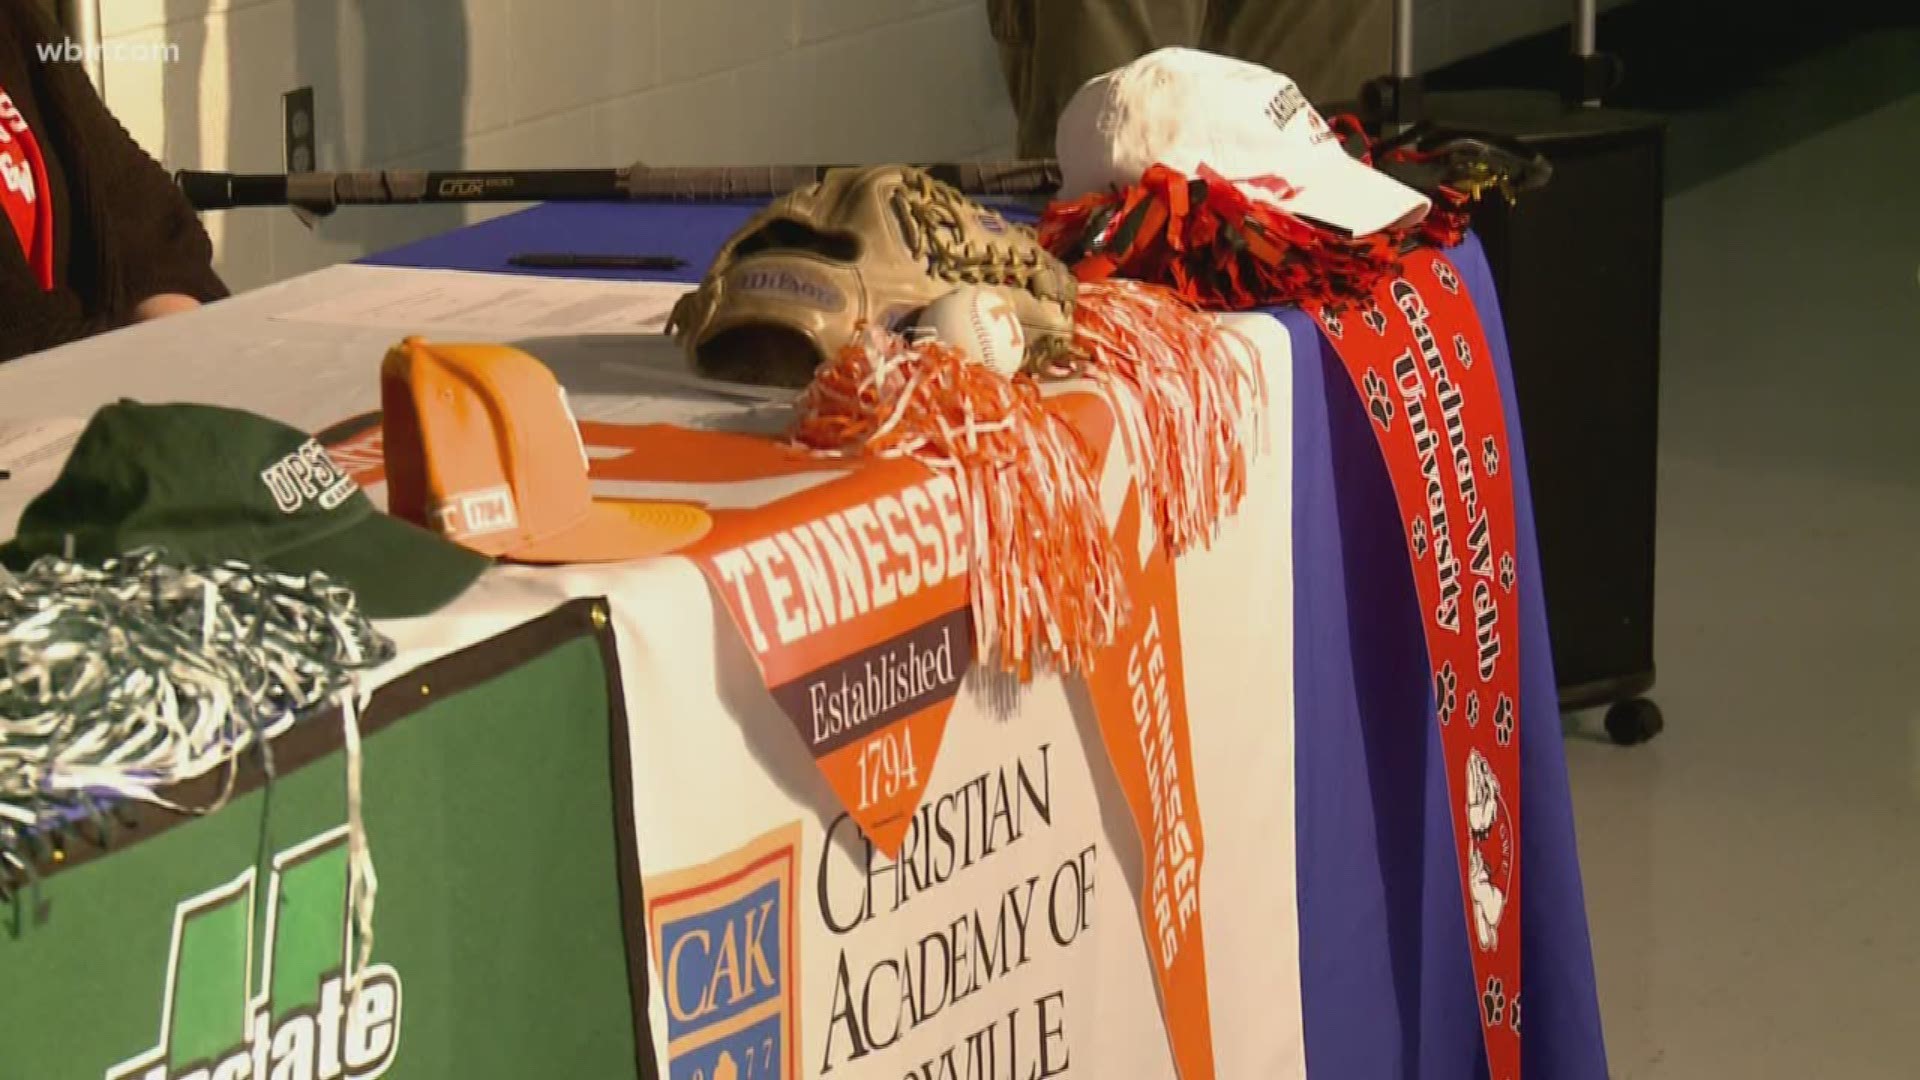 Local athletes from Knox County signed with Tennessee on Wednesday.